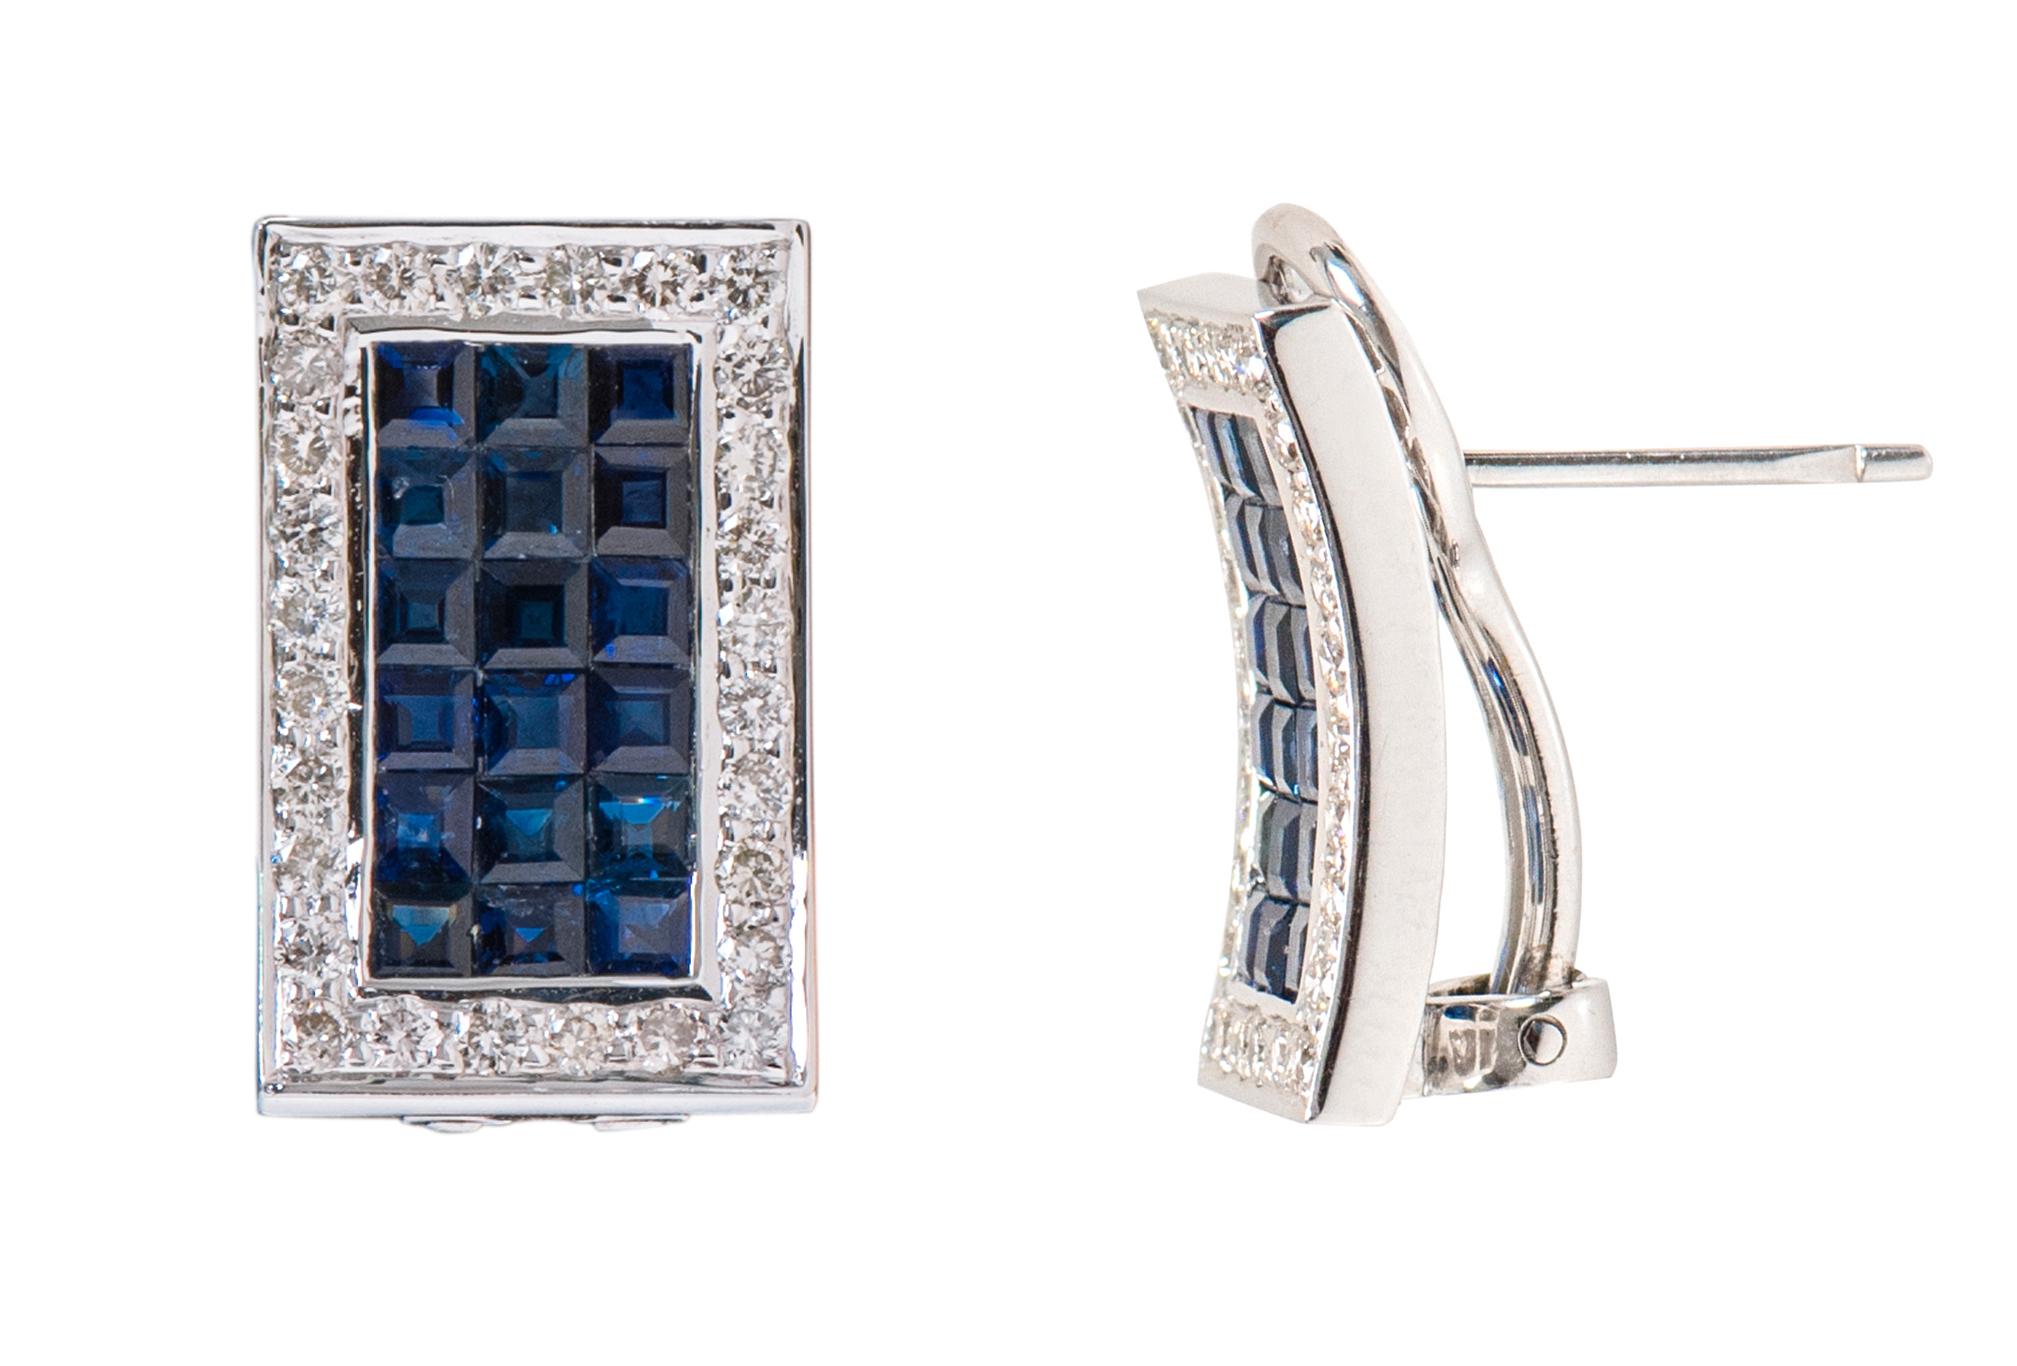 18 Karat White Gold 4.58 Carat Sapphire and Diamond Cluster Stud Earrings

This incredible royal blue sapphire and diamond stud earring is mesmerizing. The impressive no metal setting of the three perfect rows of princess cut sapphires enclosed in a